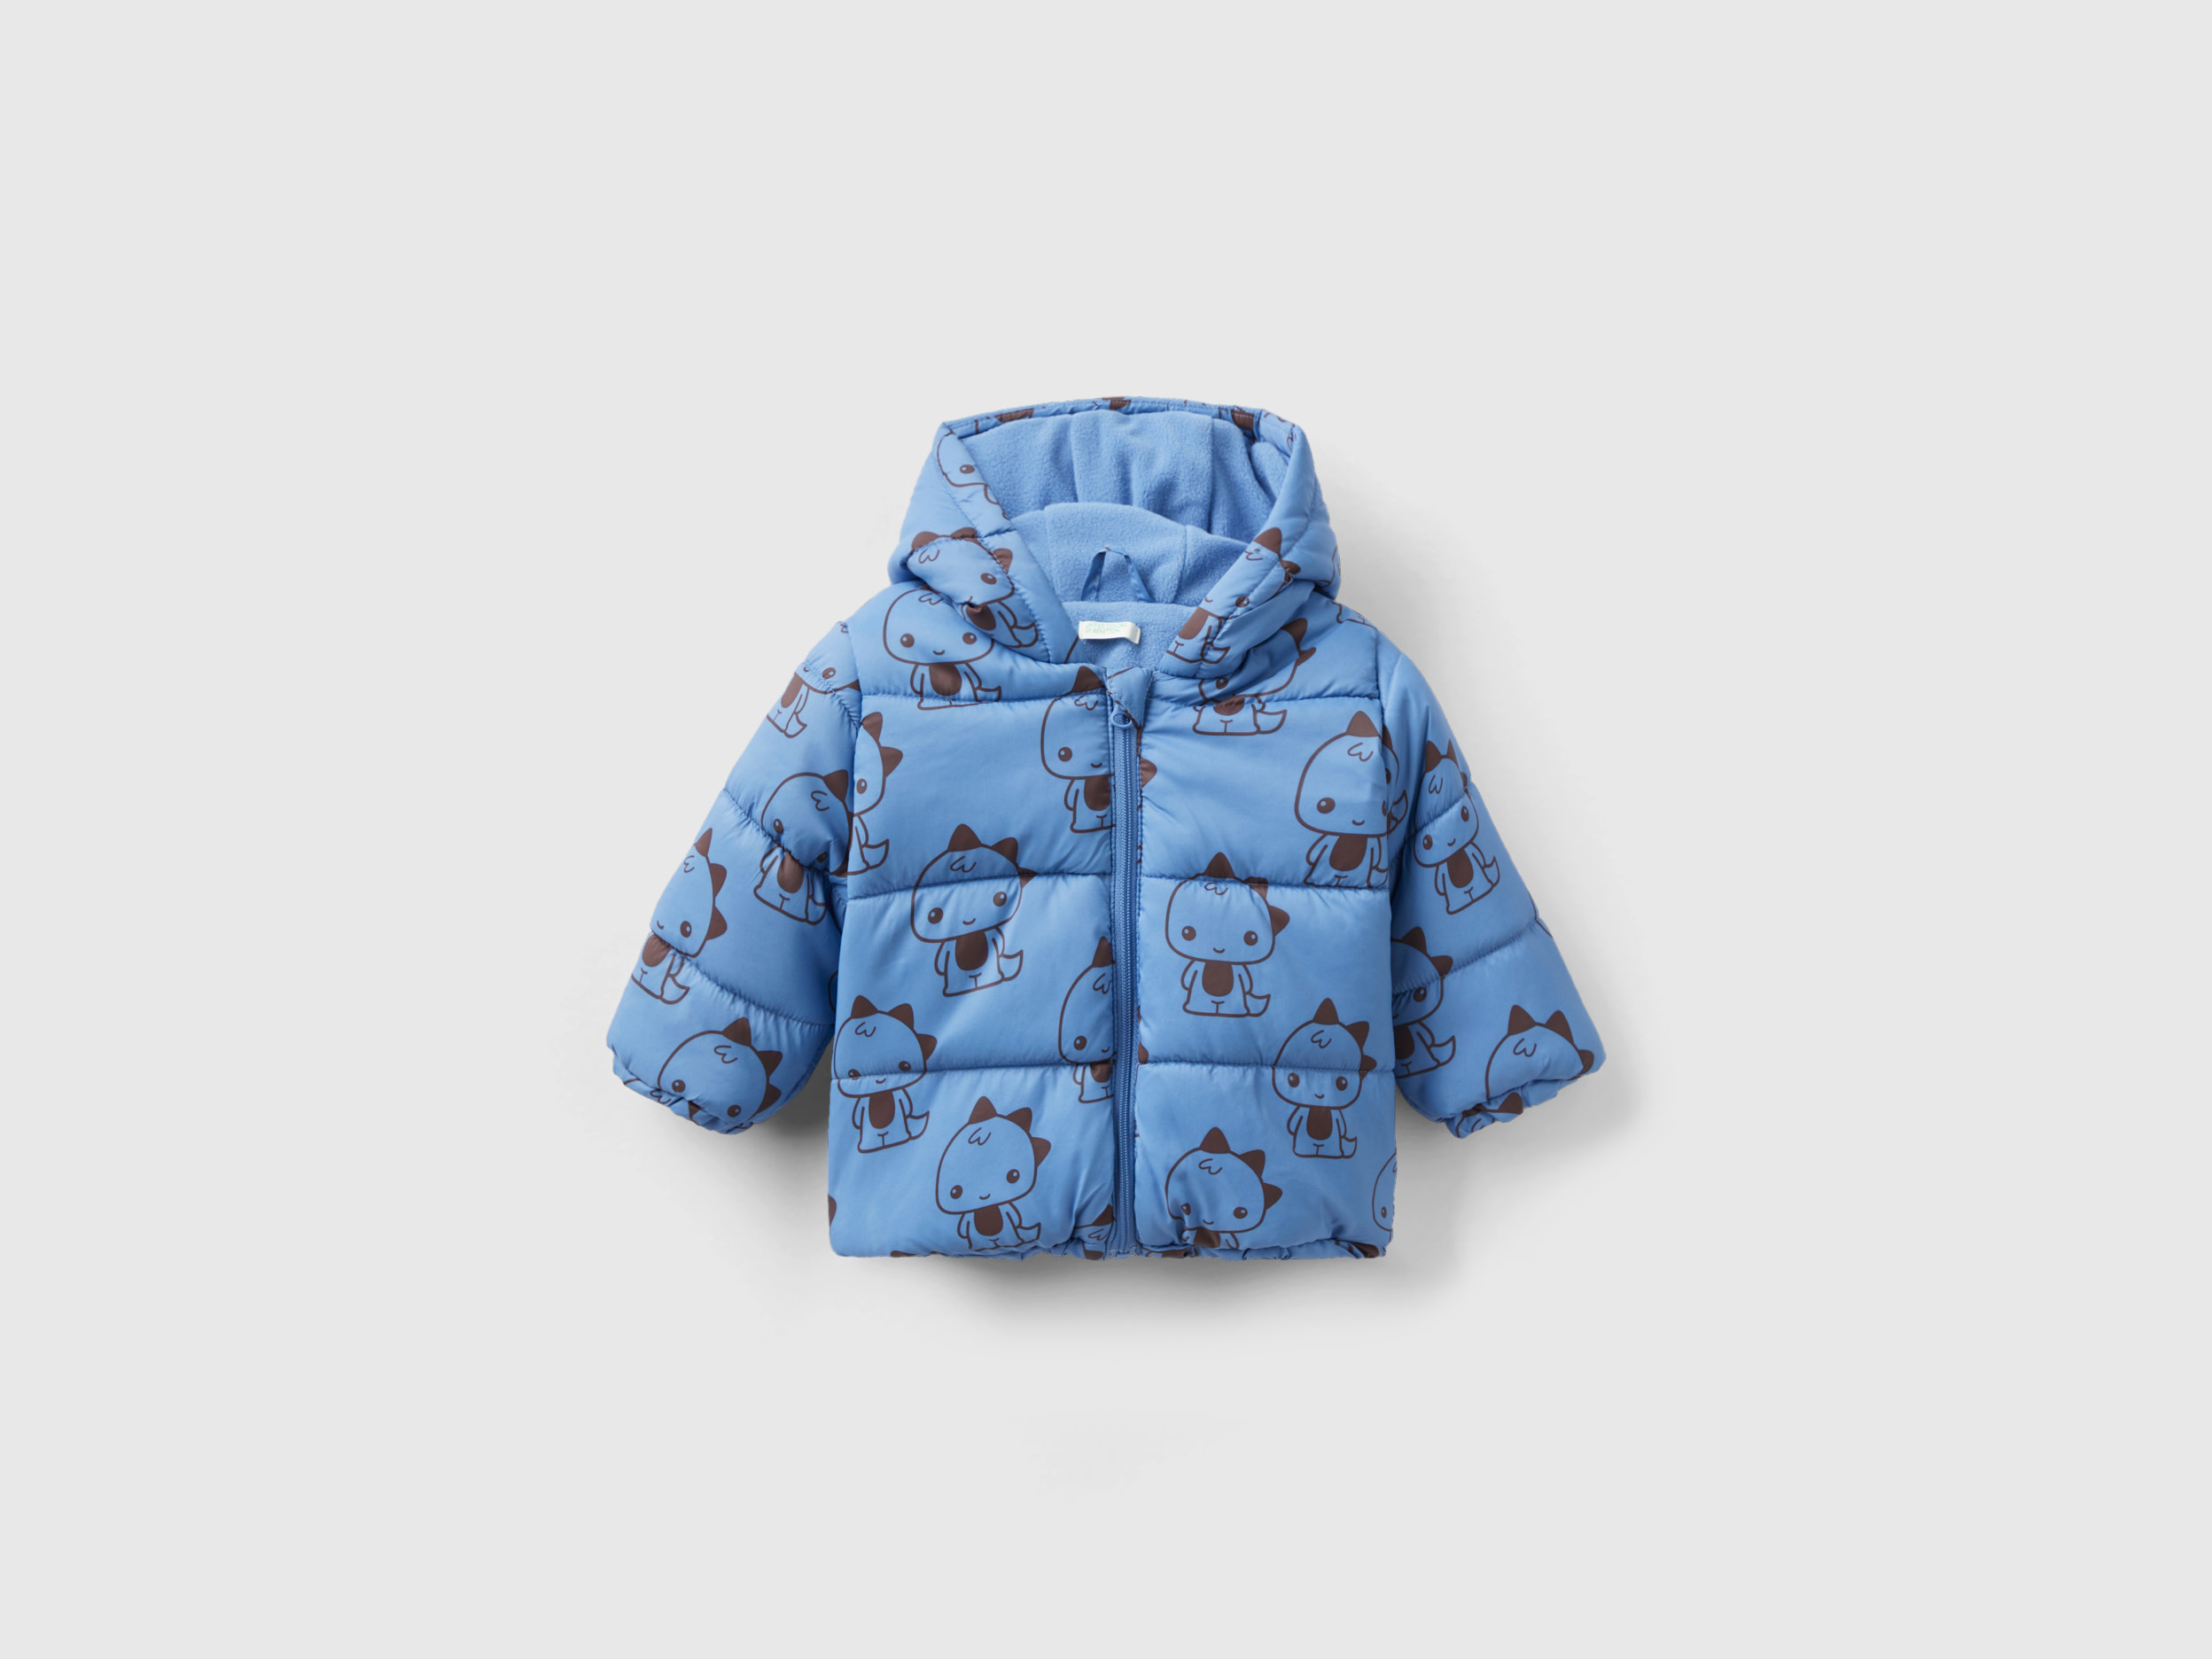 Benetton, Patterned Jacket With Zip And Hood, size 1-3, Light Blue, Kids